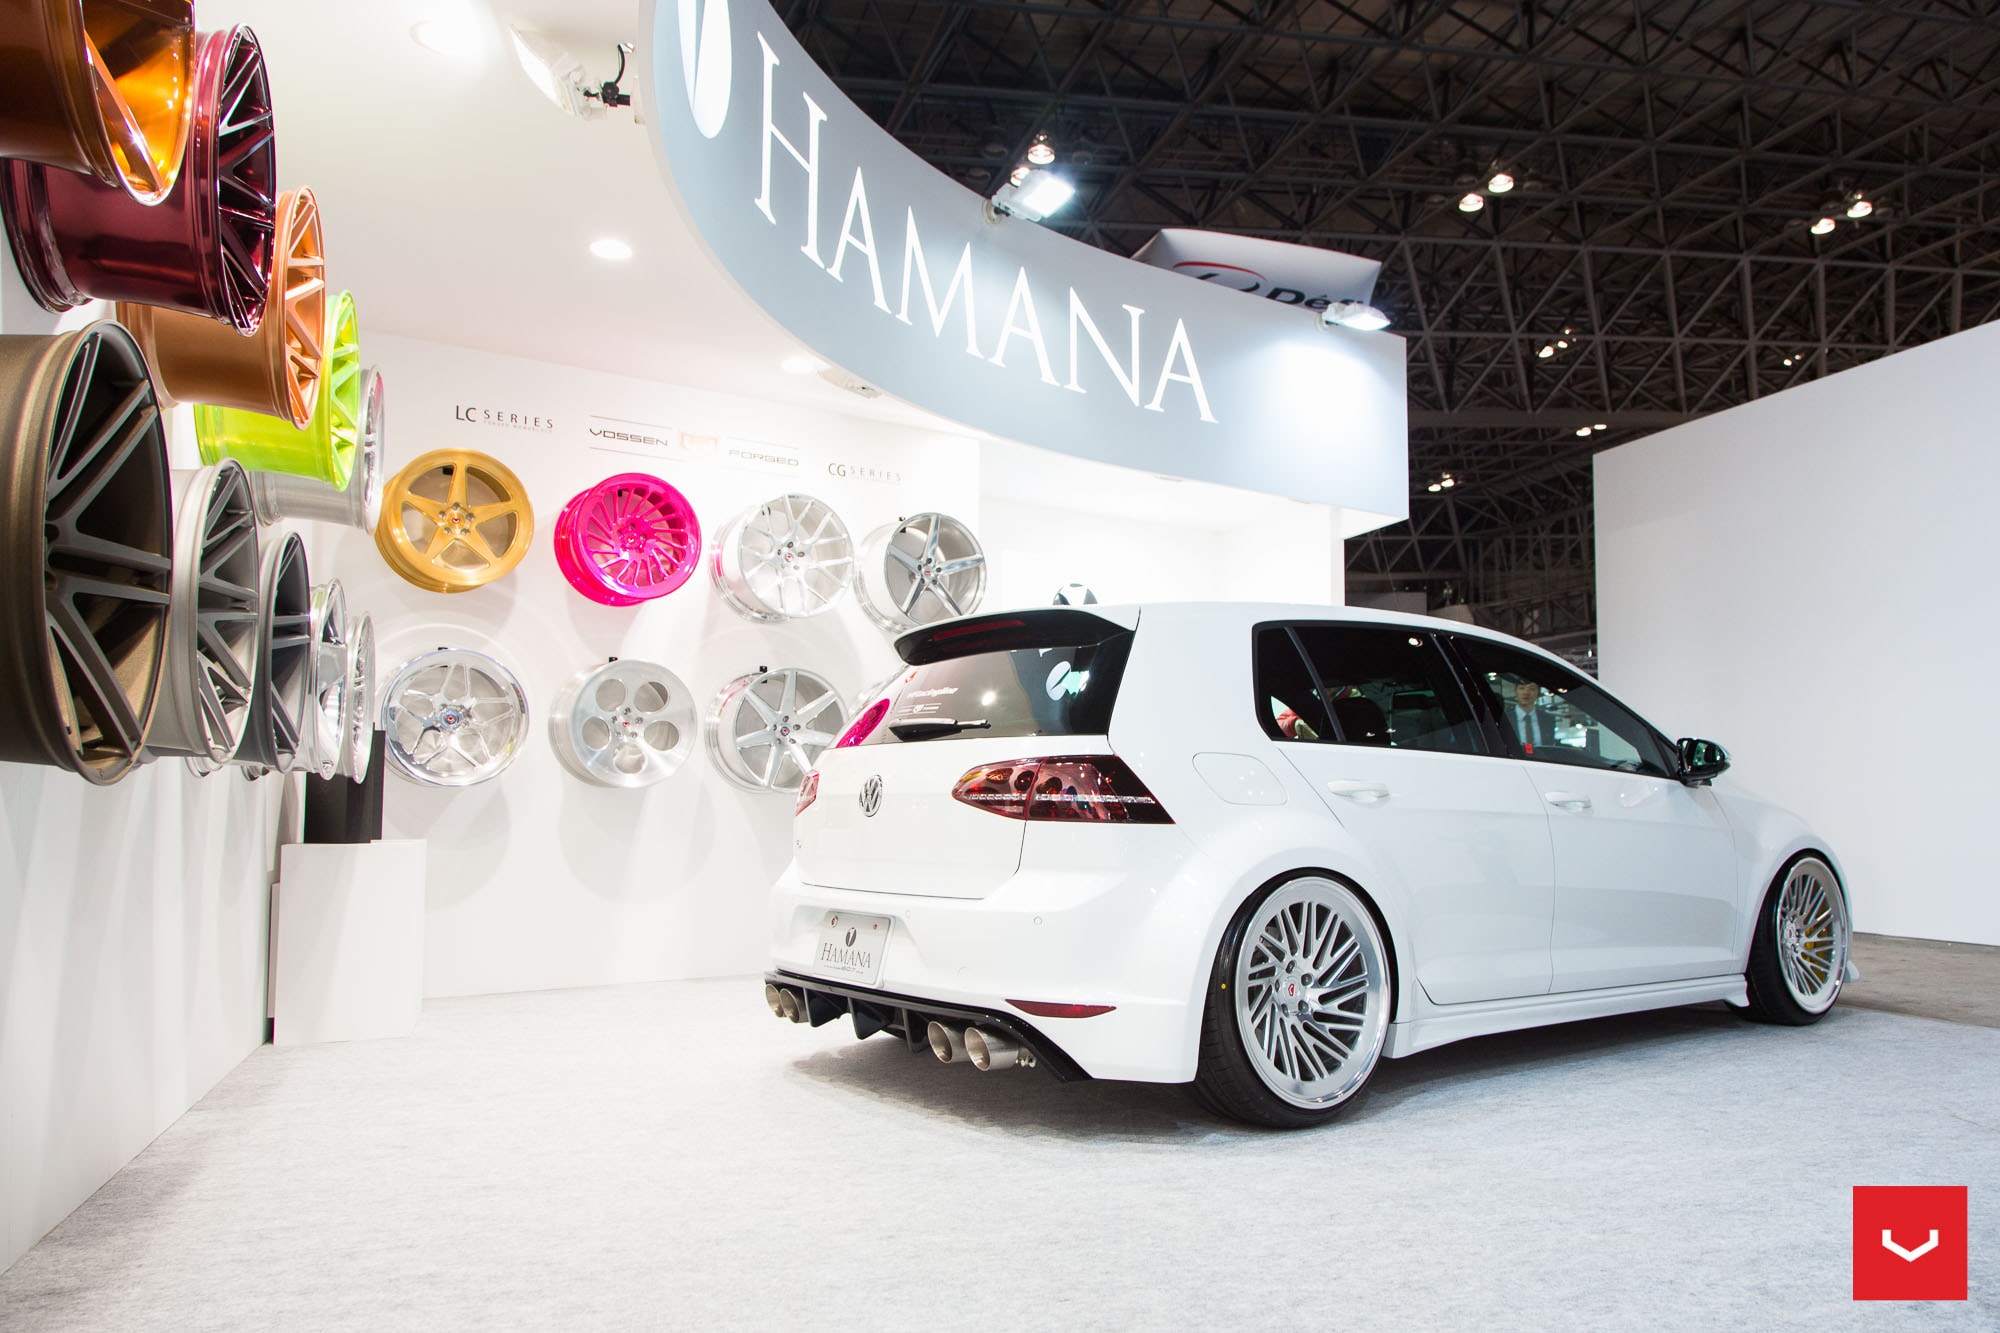 Golf R Audi S8 And Amg Gt Get Widebody Hamana Kits And Vossen Wheels Autoevolution